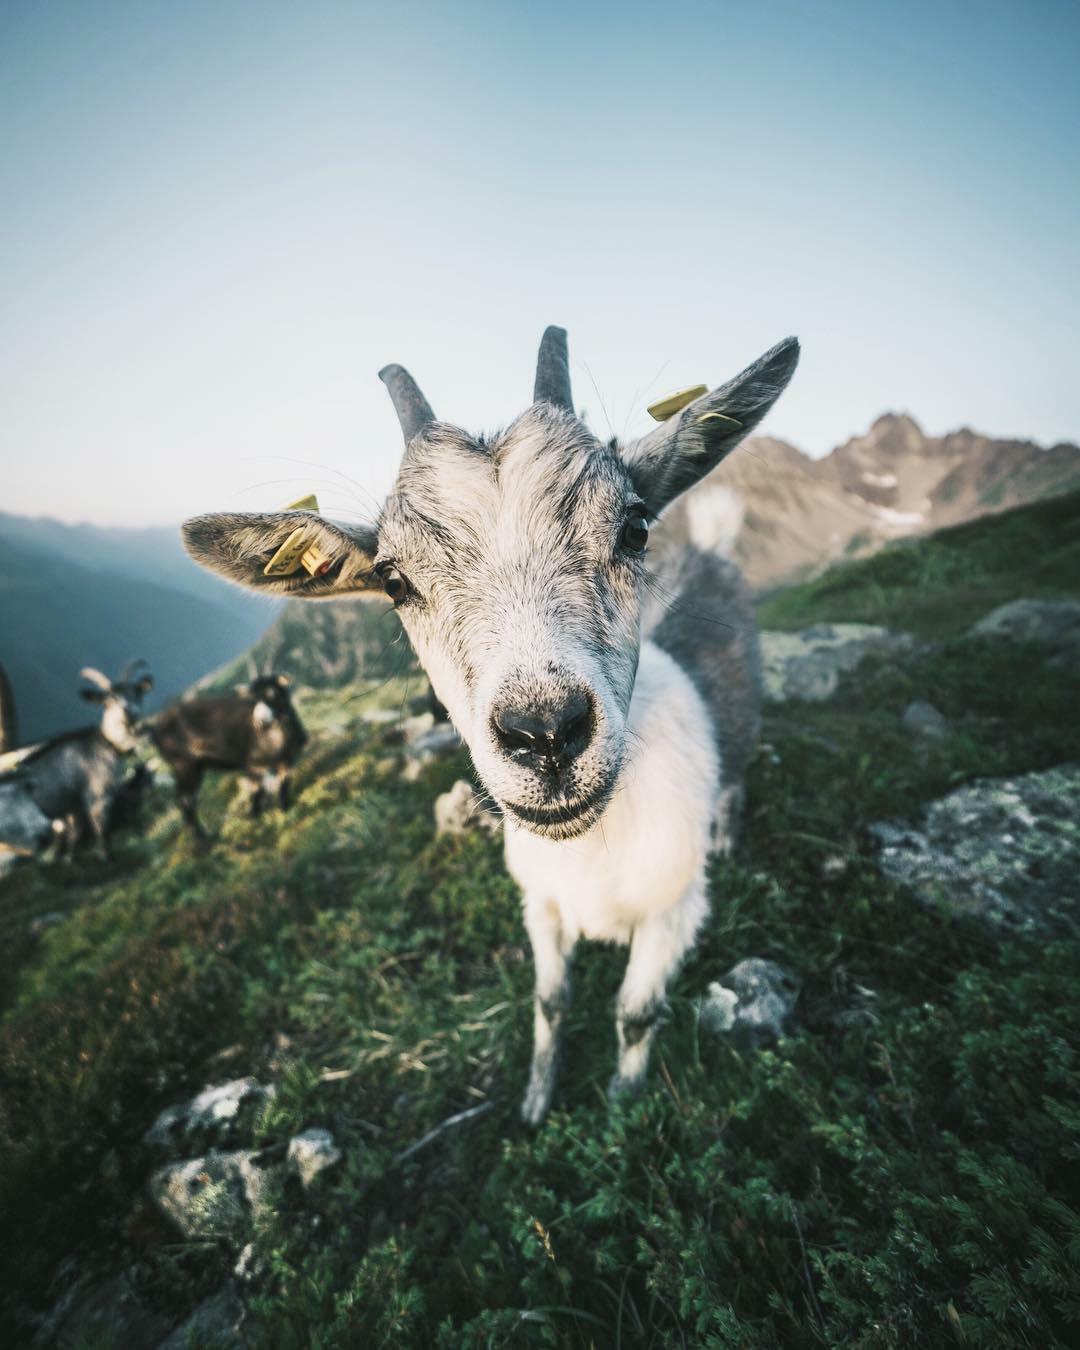 I Took A Picture Of A Goat